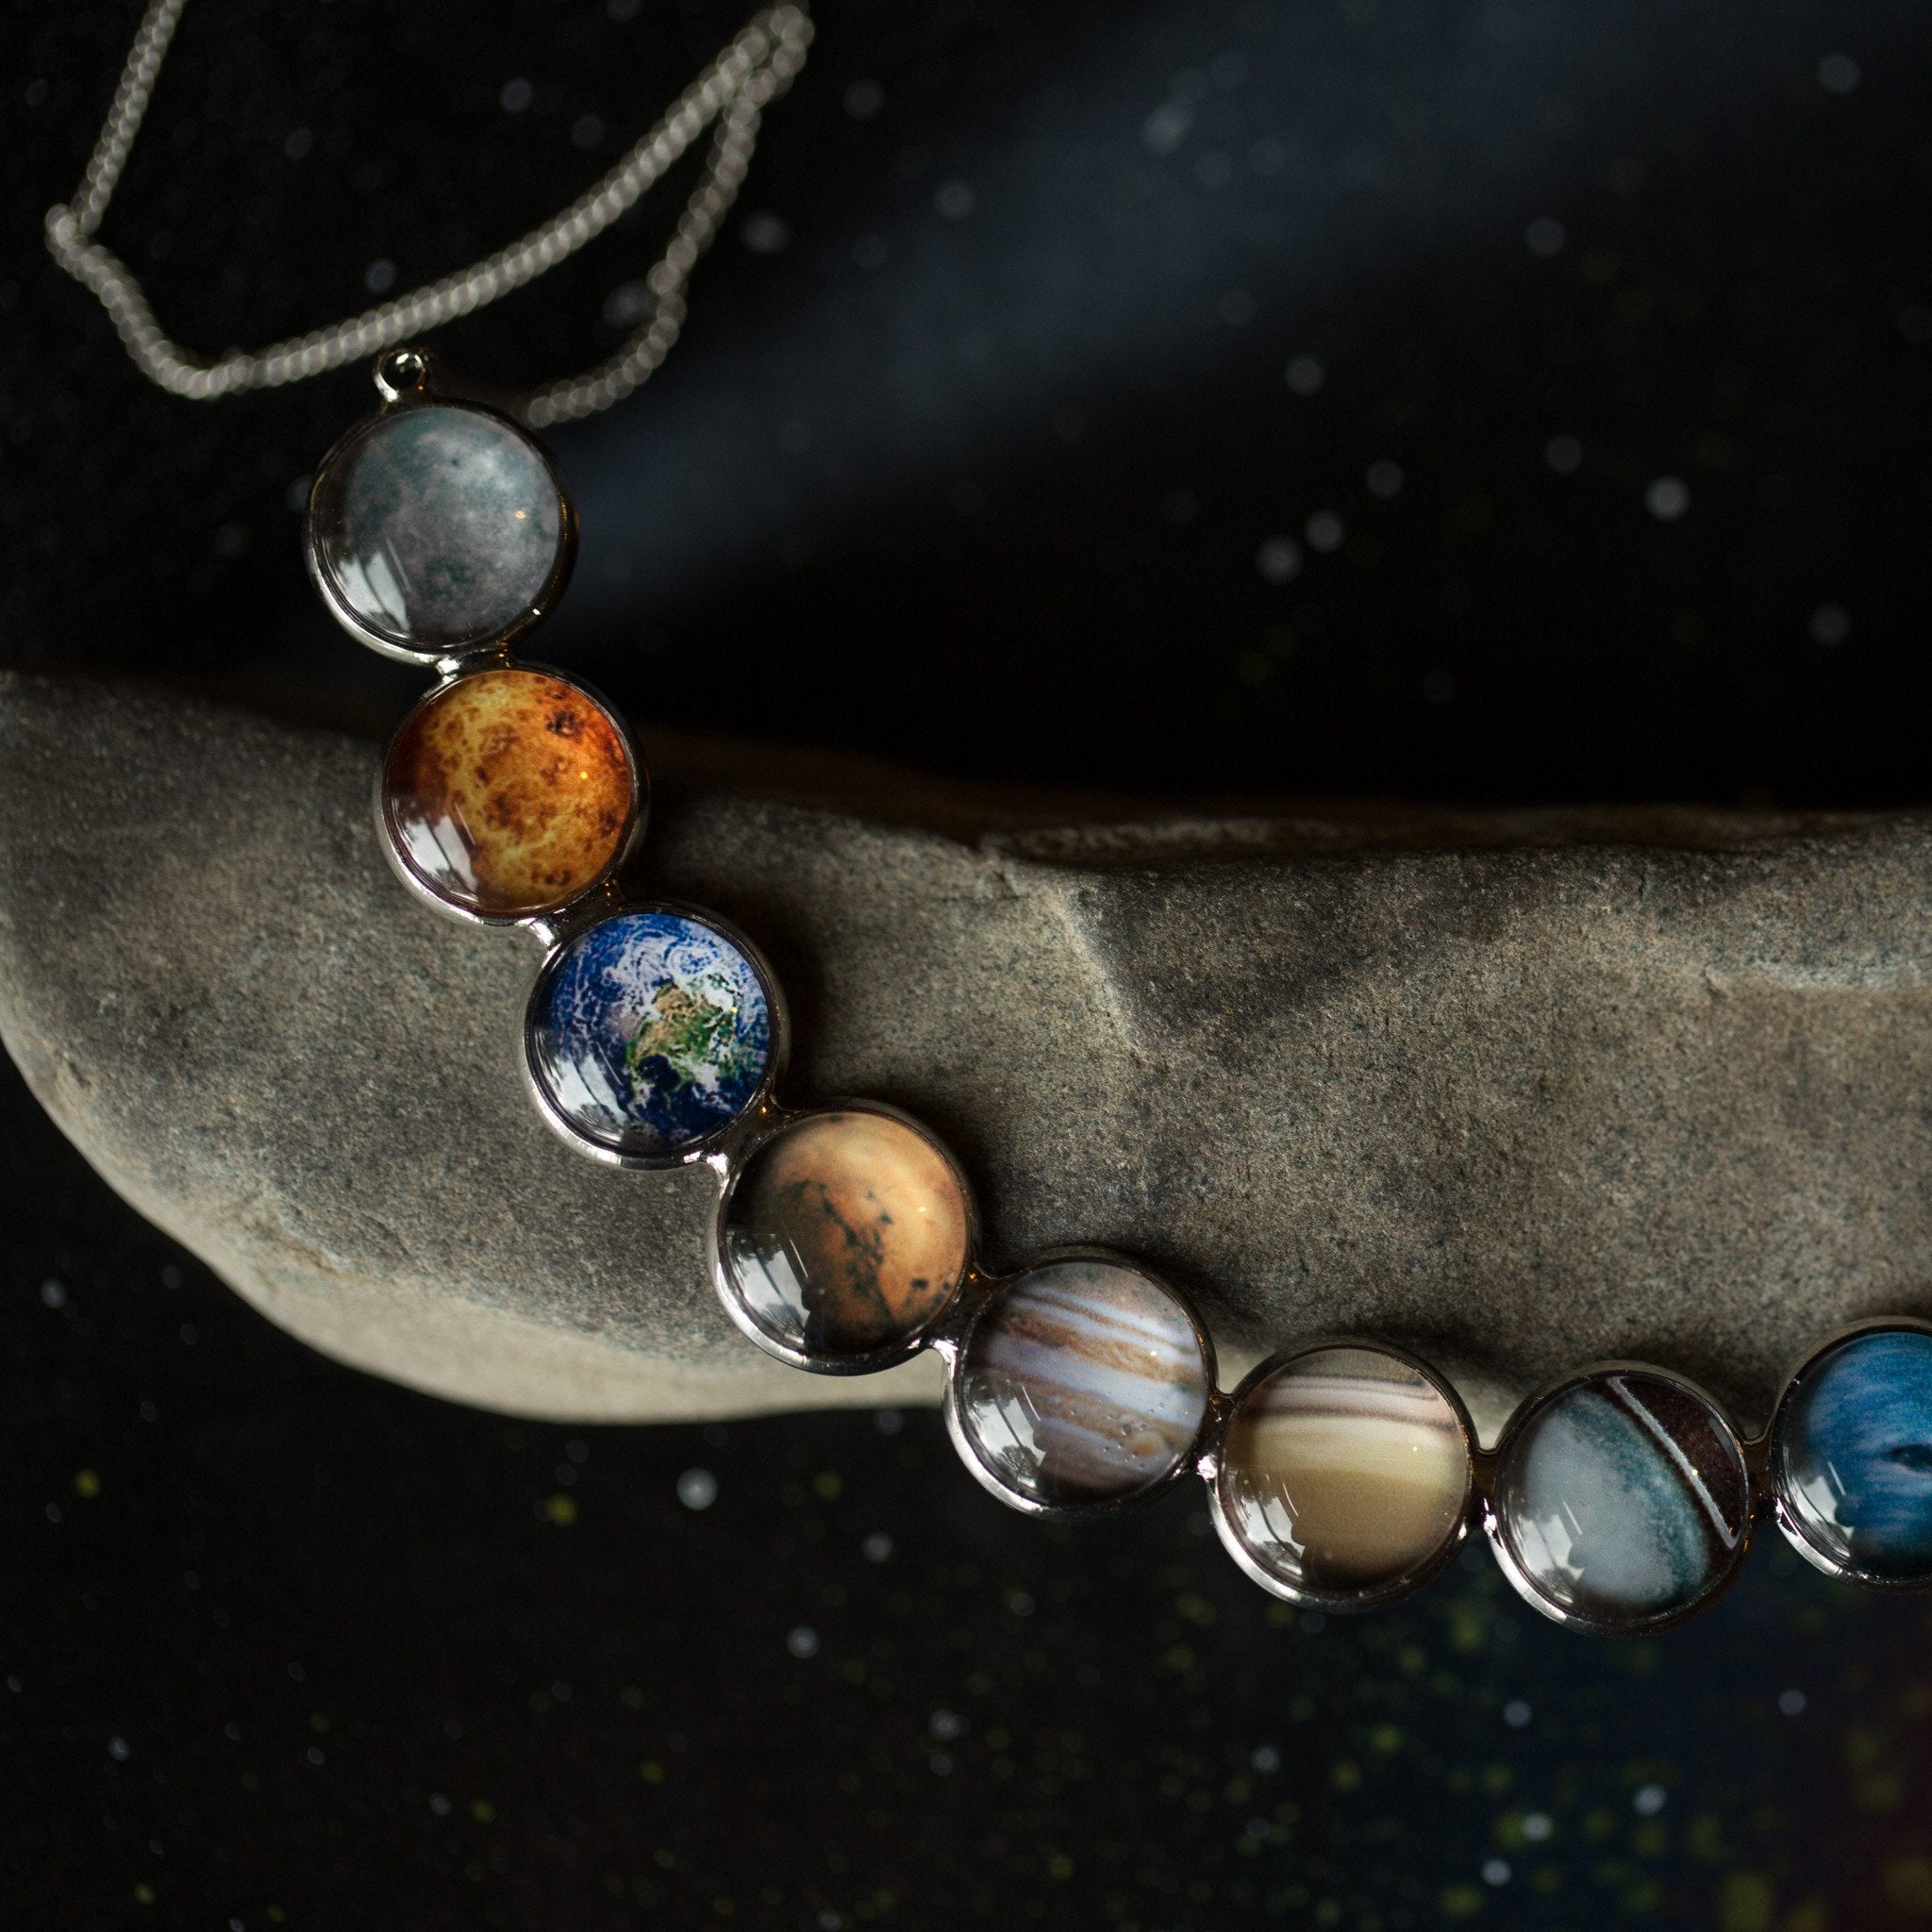 Silver Solar System Necklace - Celestial Statement Piece with Planets, Rhodium Plated Brass and Glass Materials, 18" Chain Length, 4" Pendant Width, Handcrafted, Discounts Available, Supports Space Exploration and Research - Jewelry & Watches - Bijou Her -  -  - 